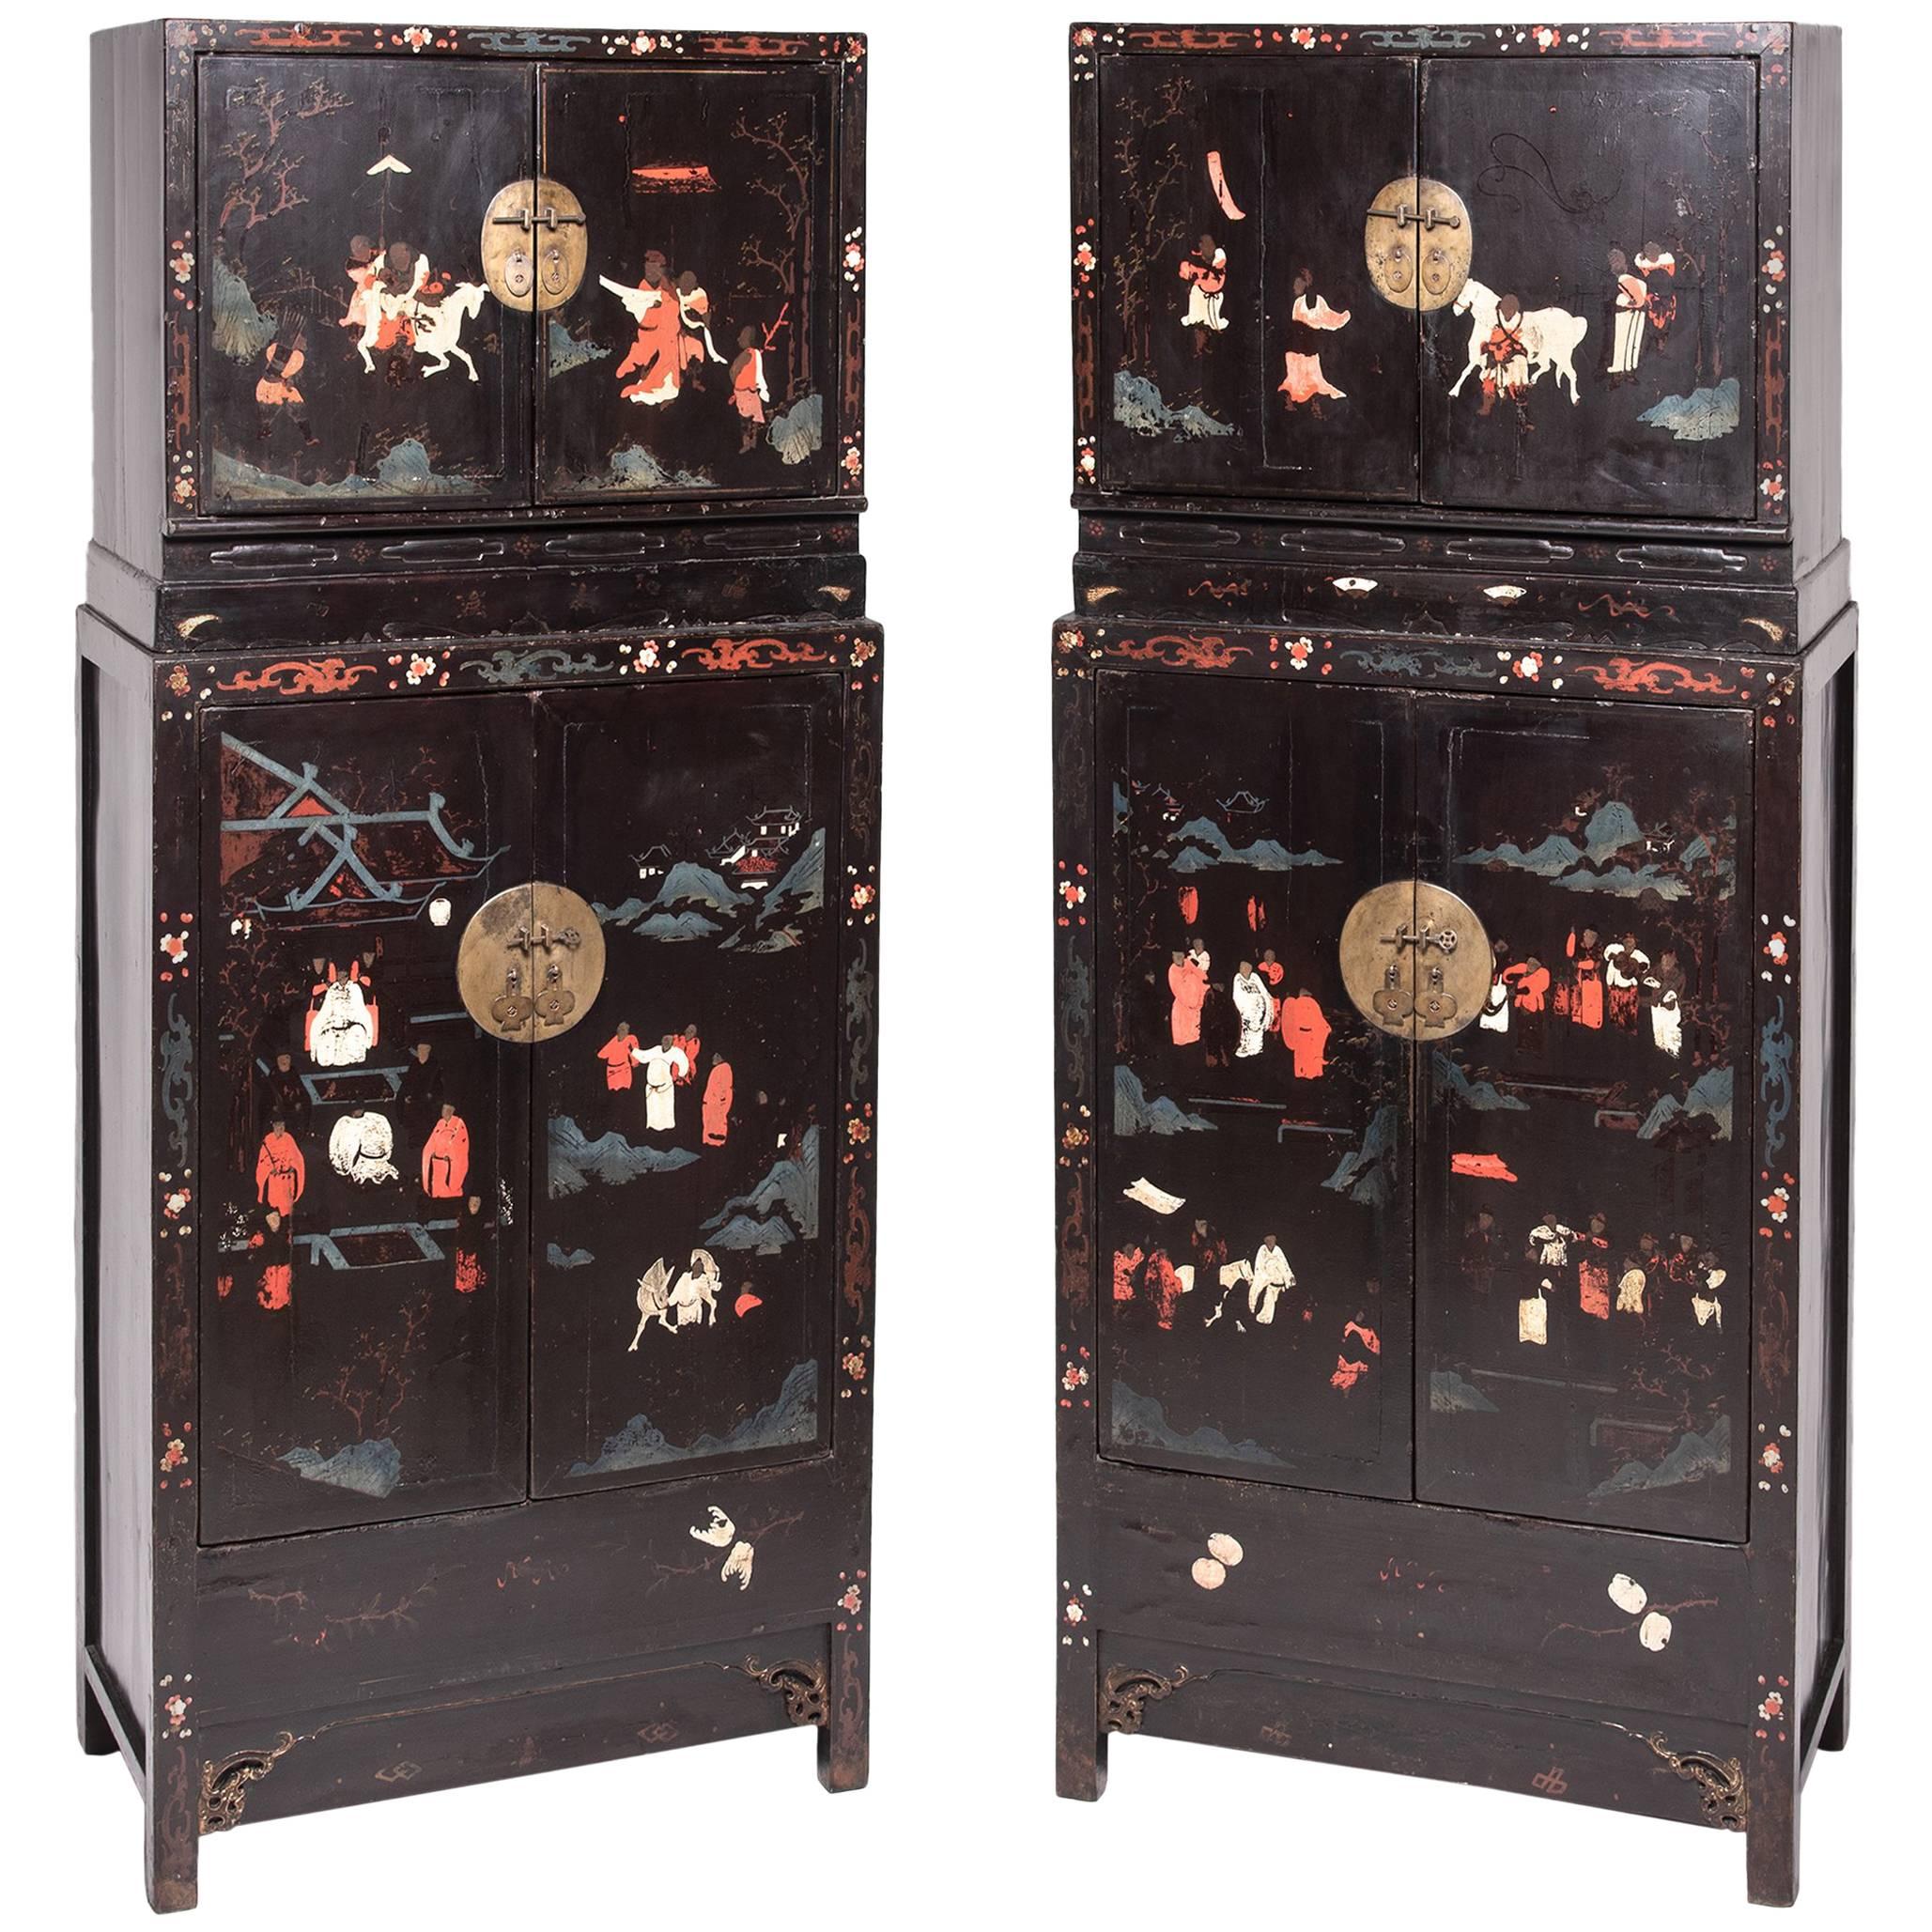 Pair of Chinese Ming Painted Compound Cabinets, c. 1600